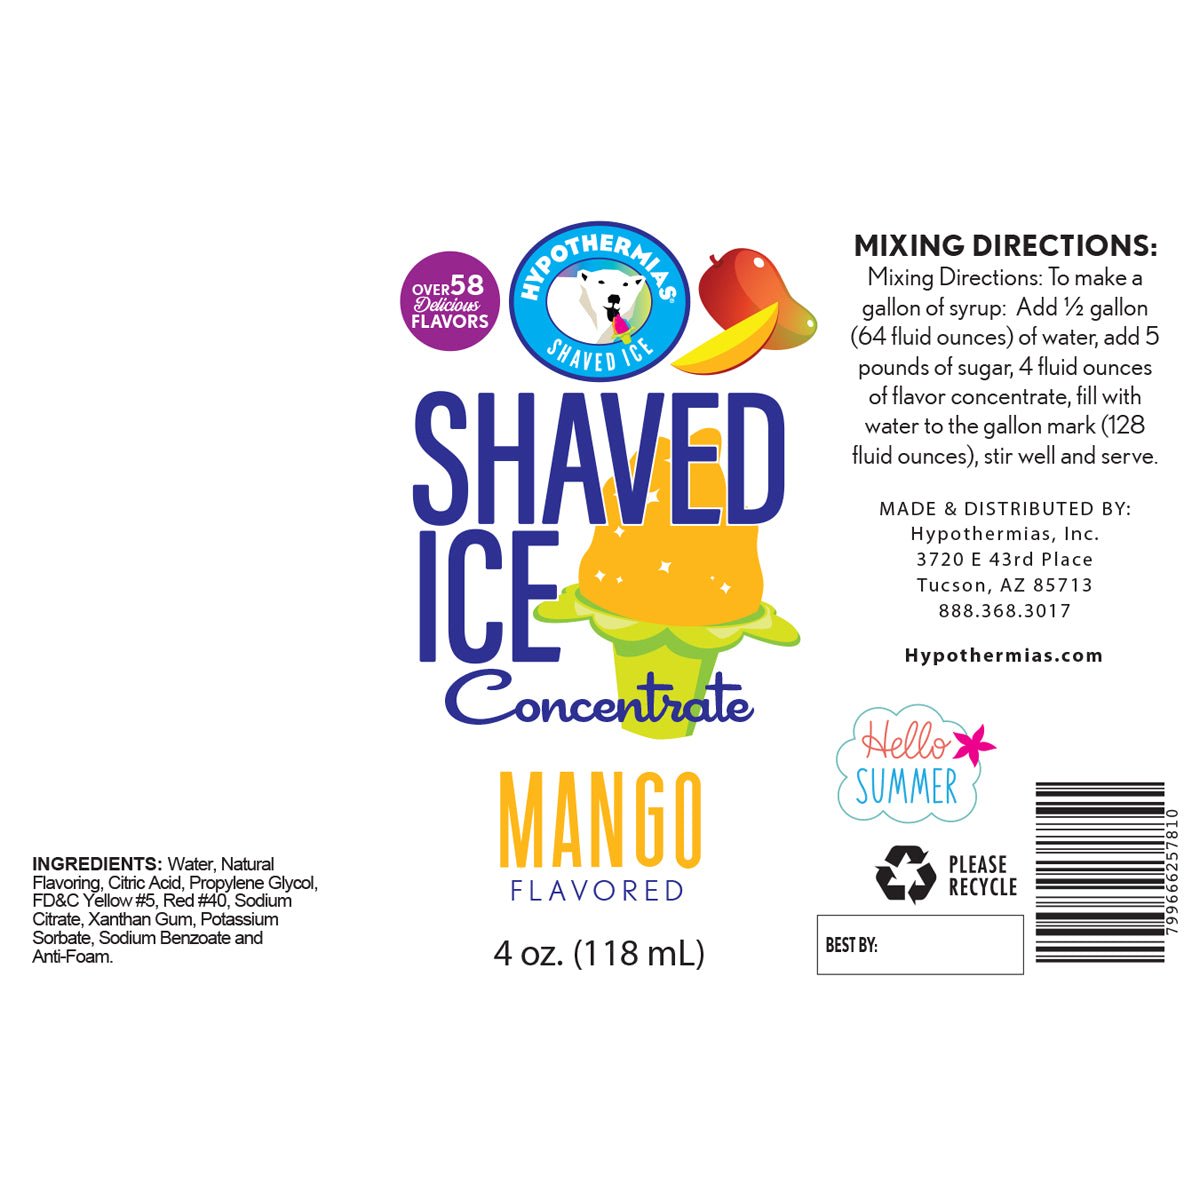 Hypothermias mango shaved ice or snow cone flavor syrup concentrate ingredient label.